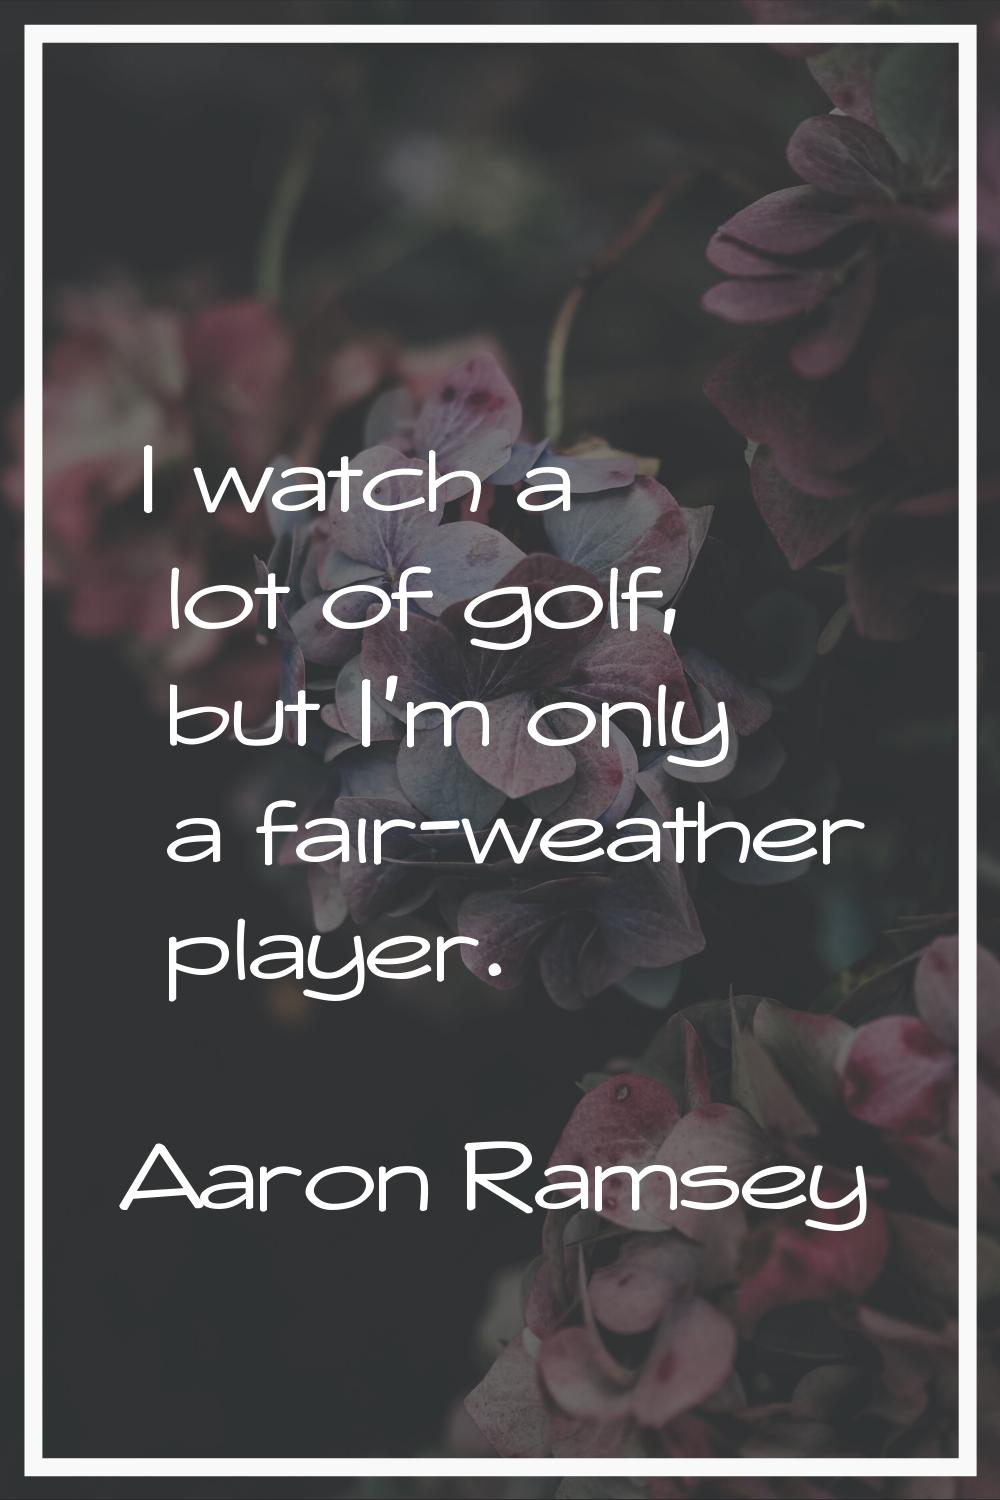 I watch a lot of golf, but I'm only a fair-weather player.